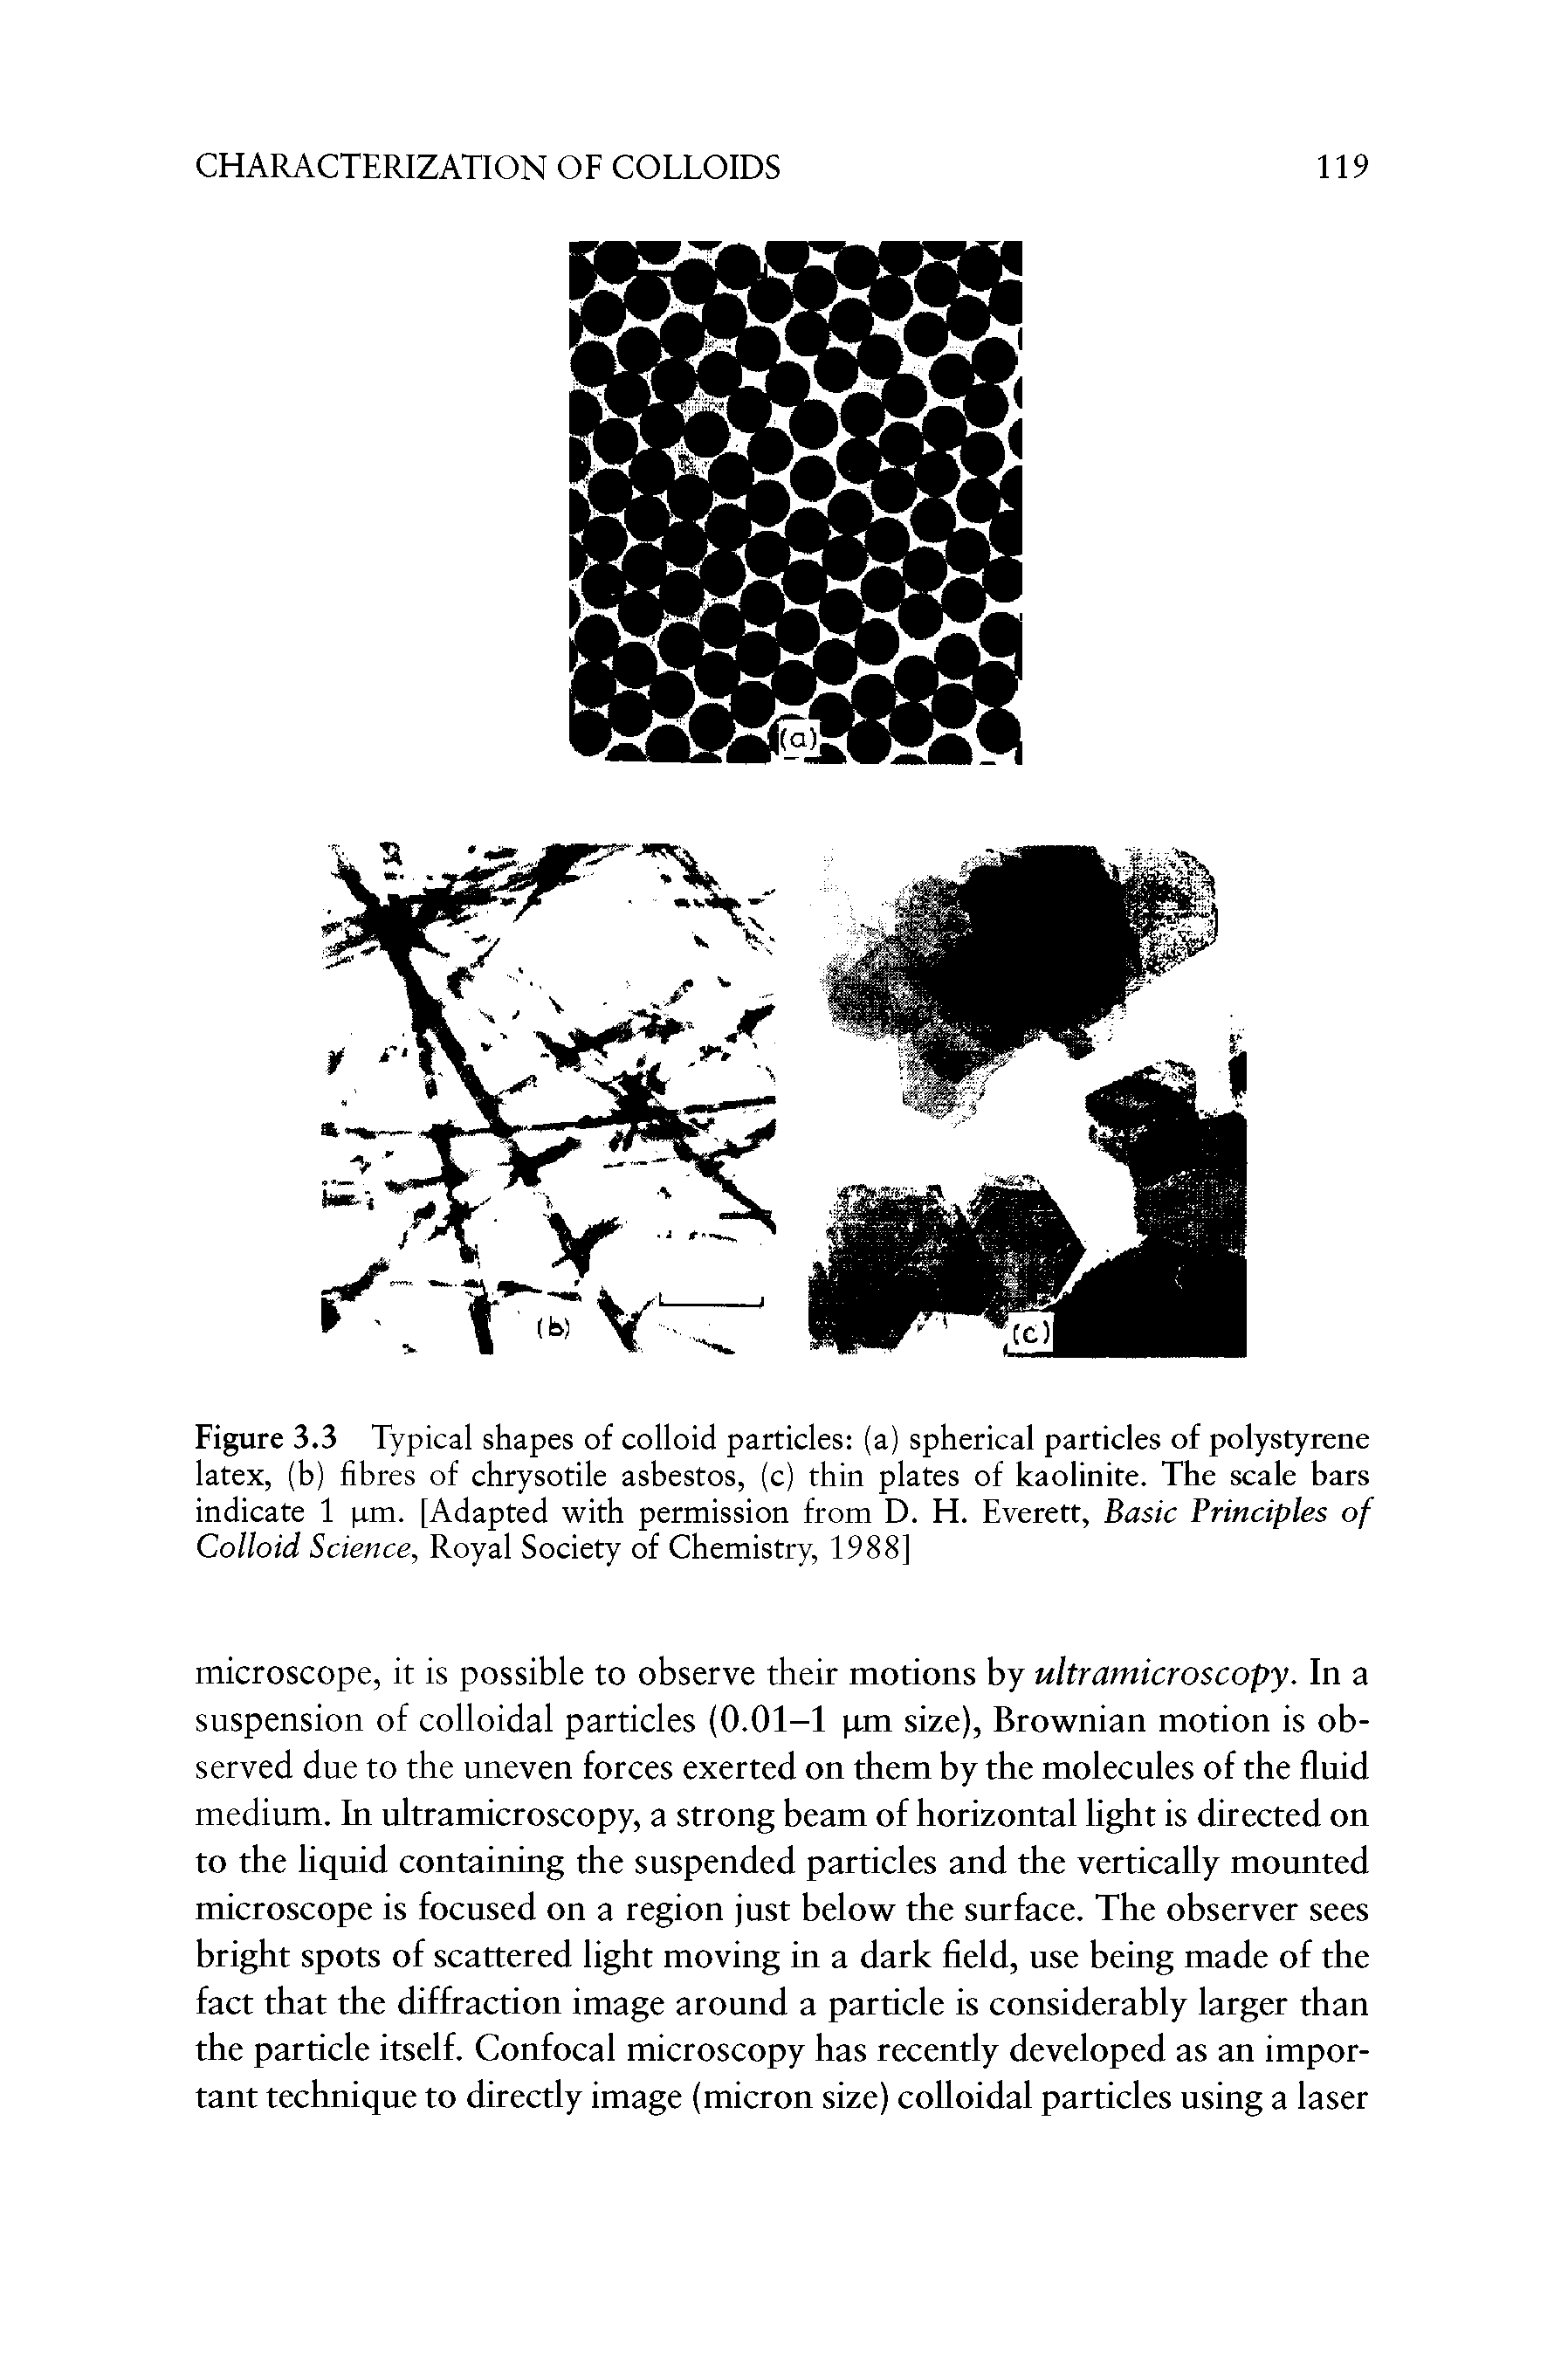 Figure 3.3 Typical shapes of colloid particles (a) spherical particles of polystyrene latex, (h) fibres of chrysotile asbestos, (c) thin plates of kaolinite. The scale bars indicate 1 pm. [Adapted with permission from D. H. Everett, Basic Principles of Colloid Science, Royal Society of Chemistry, 1988]...